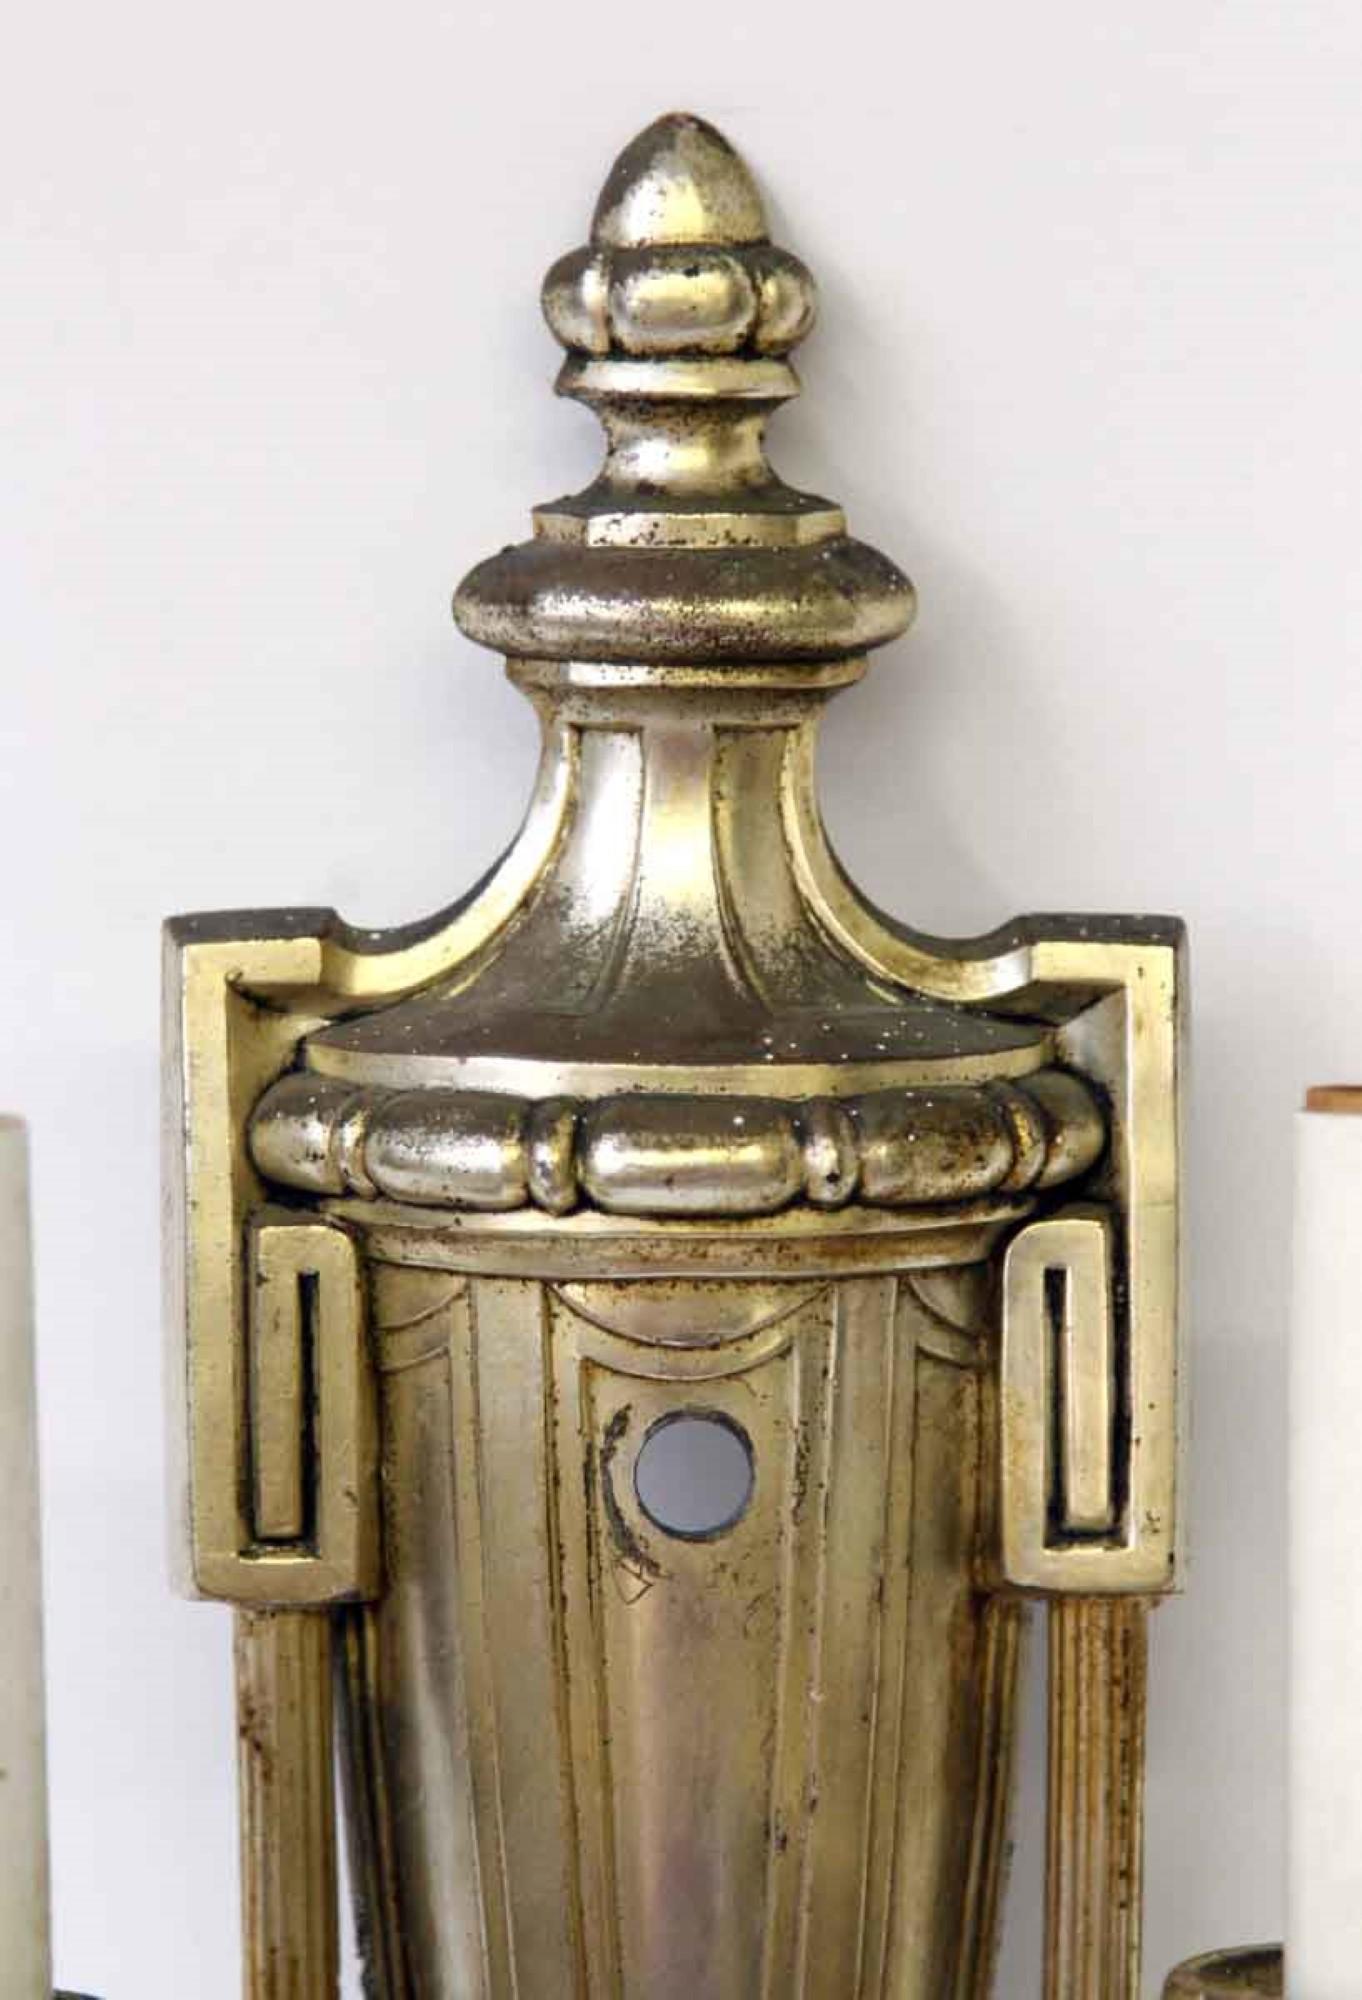 American made neoclassical brass silvered sconces with casting details on the bobeches, cup and back plate. Classic urn and Greek key detail grace these stately wall sconces. Priced as a pair. This can be seen at our 400 Gilligan St location in